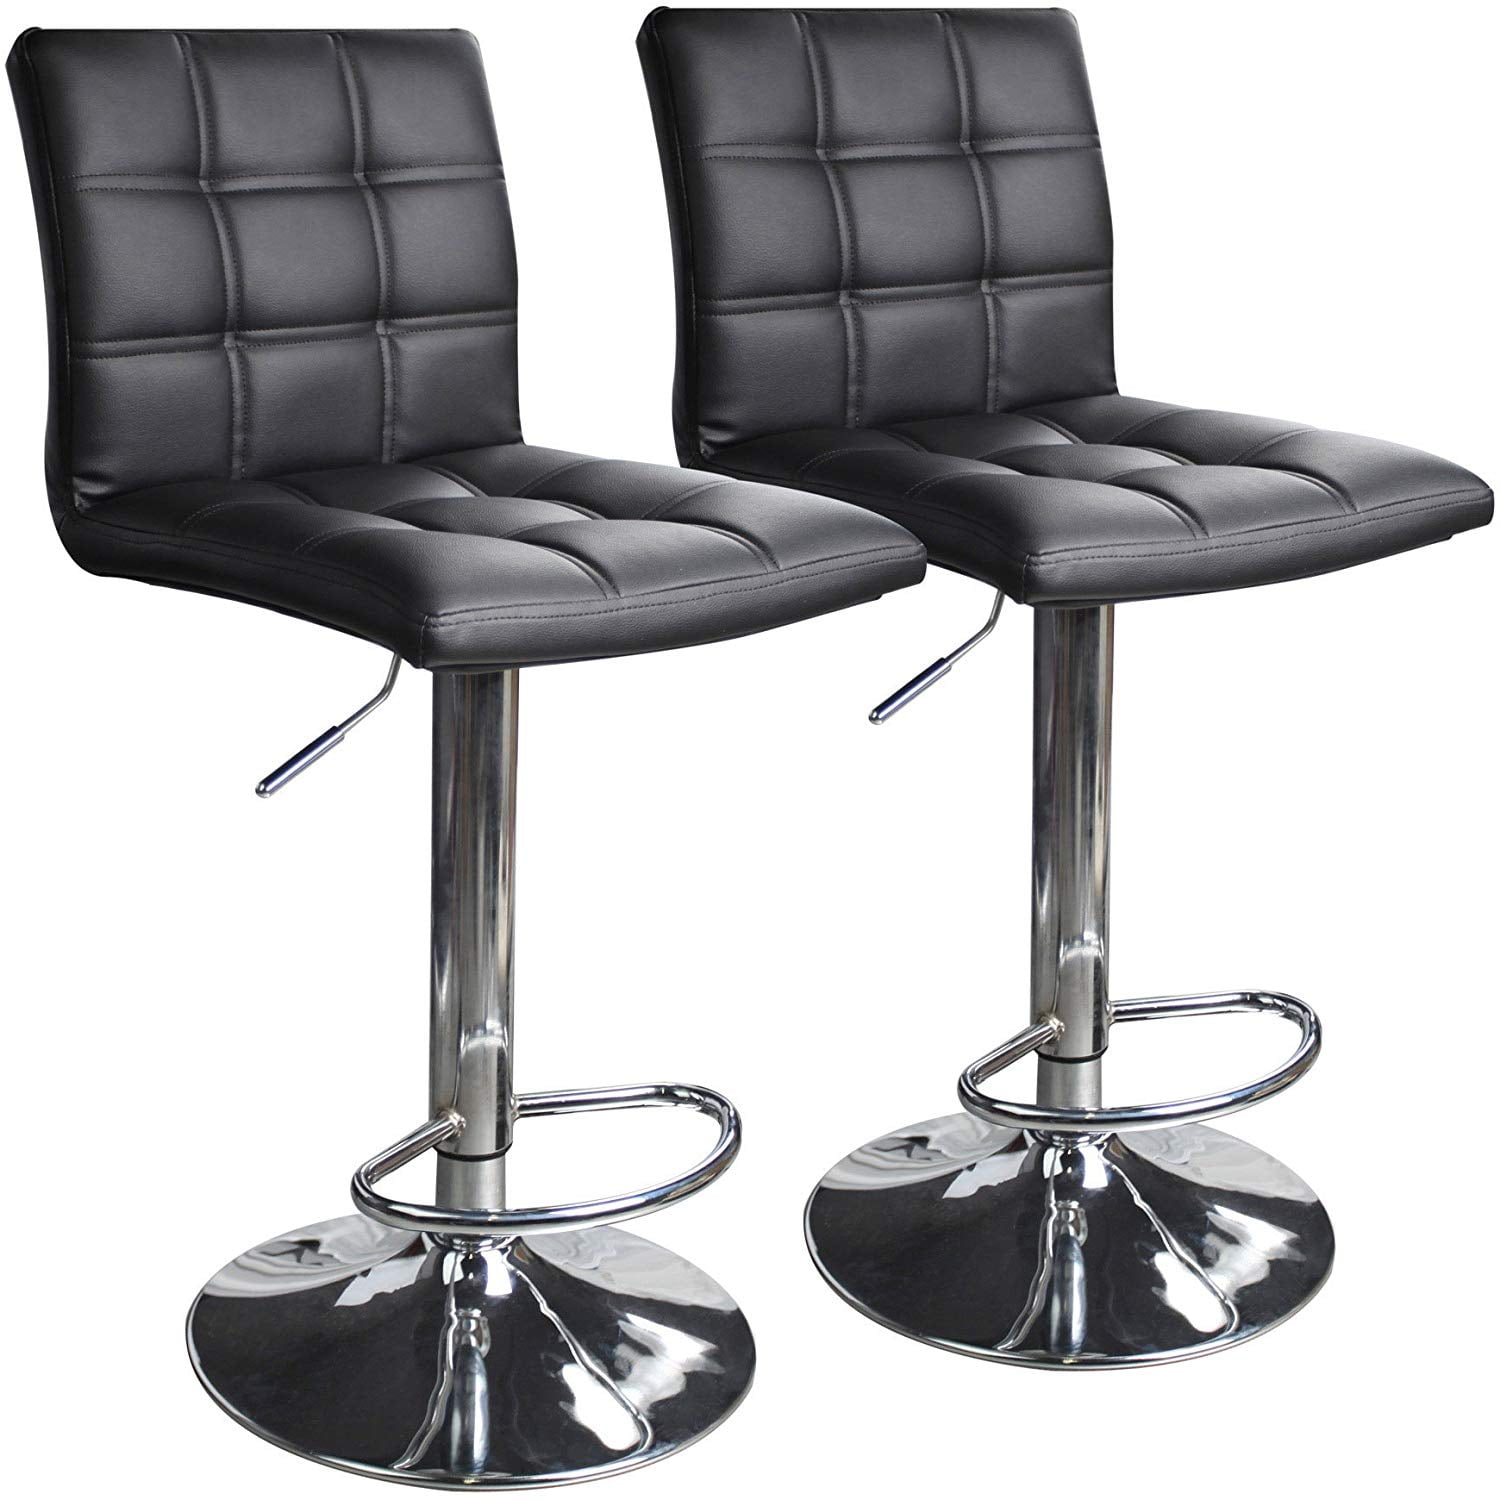 Details about   Set of 2 Bar Stools Adjustable Swivel Counter Height Dining Chair Leather Black 